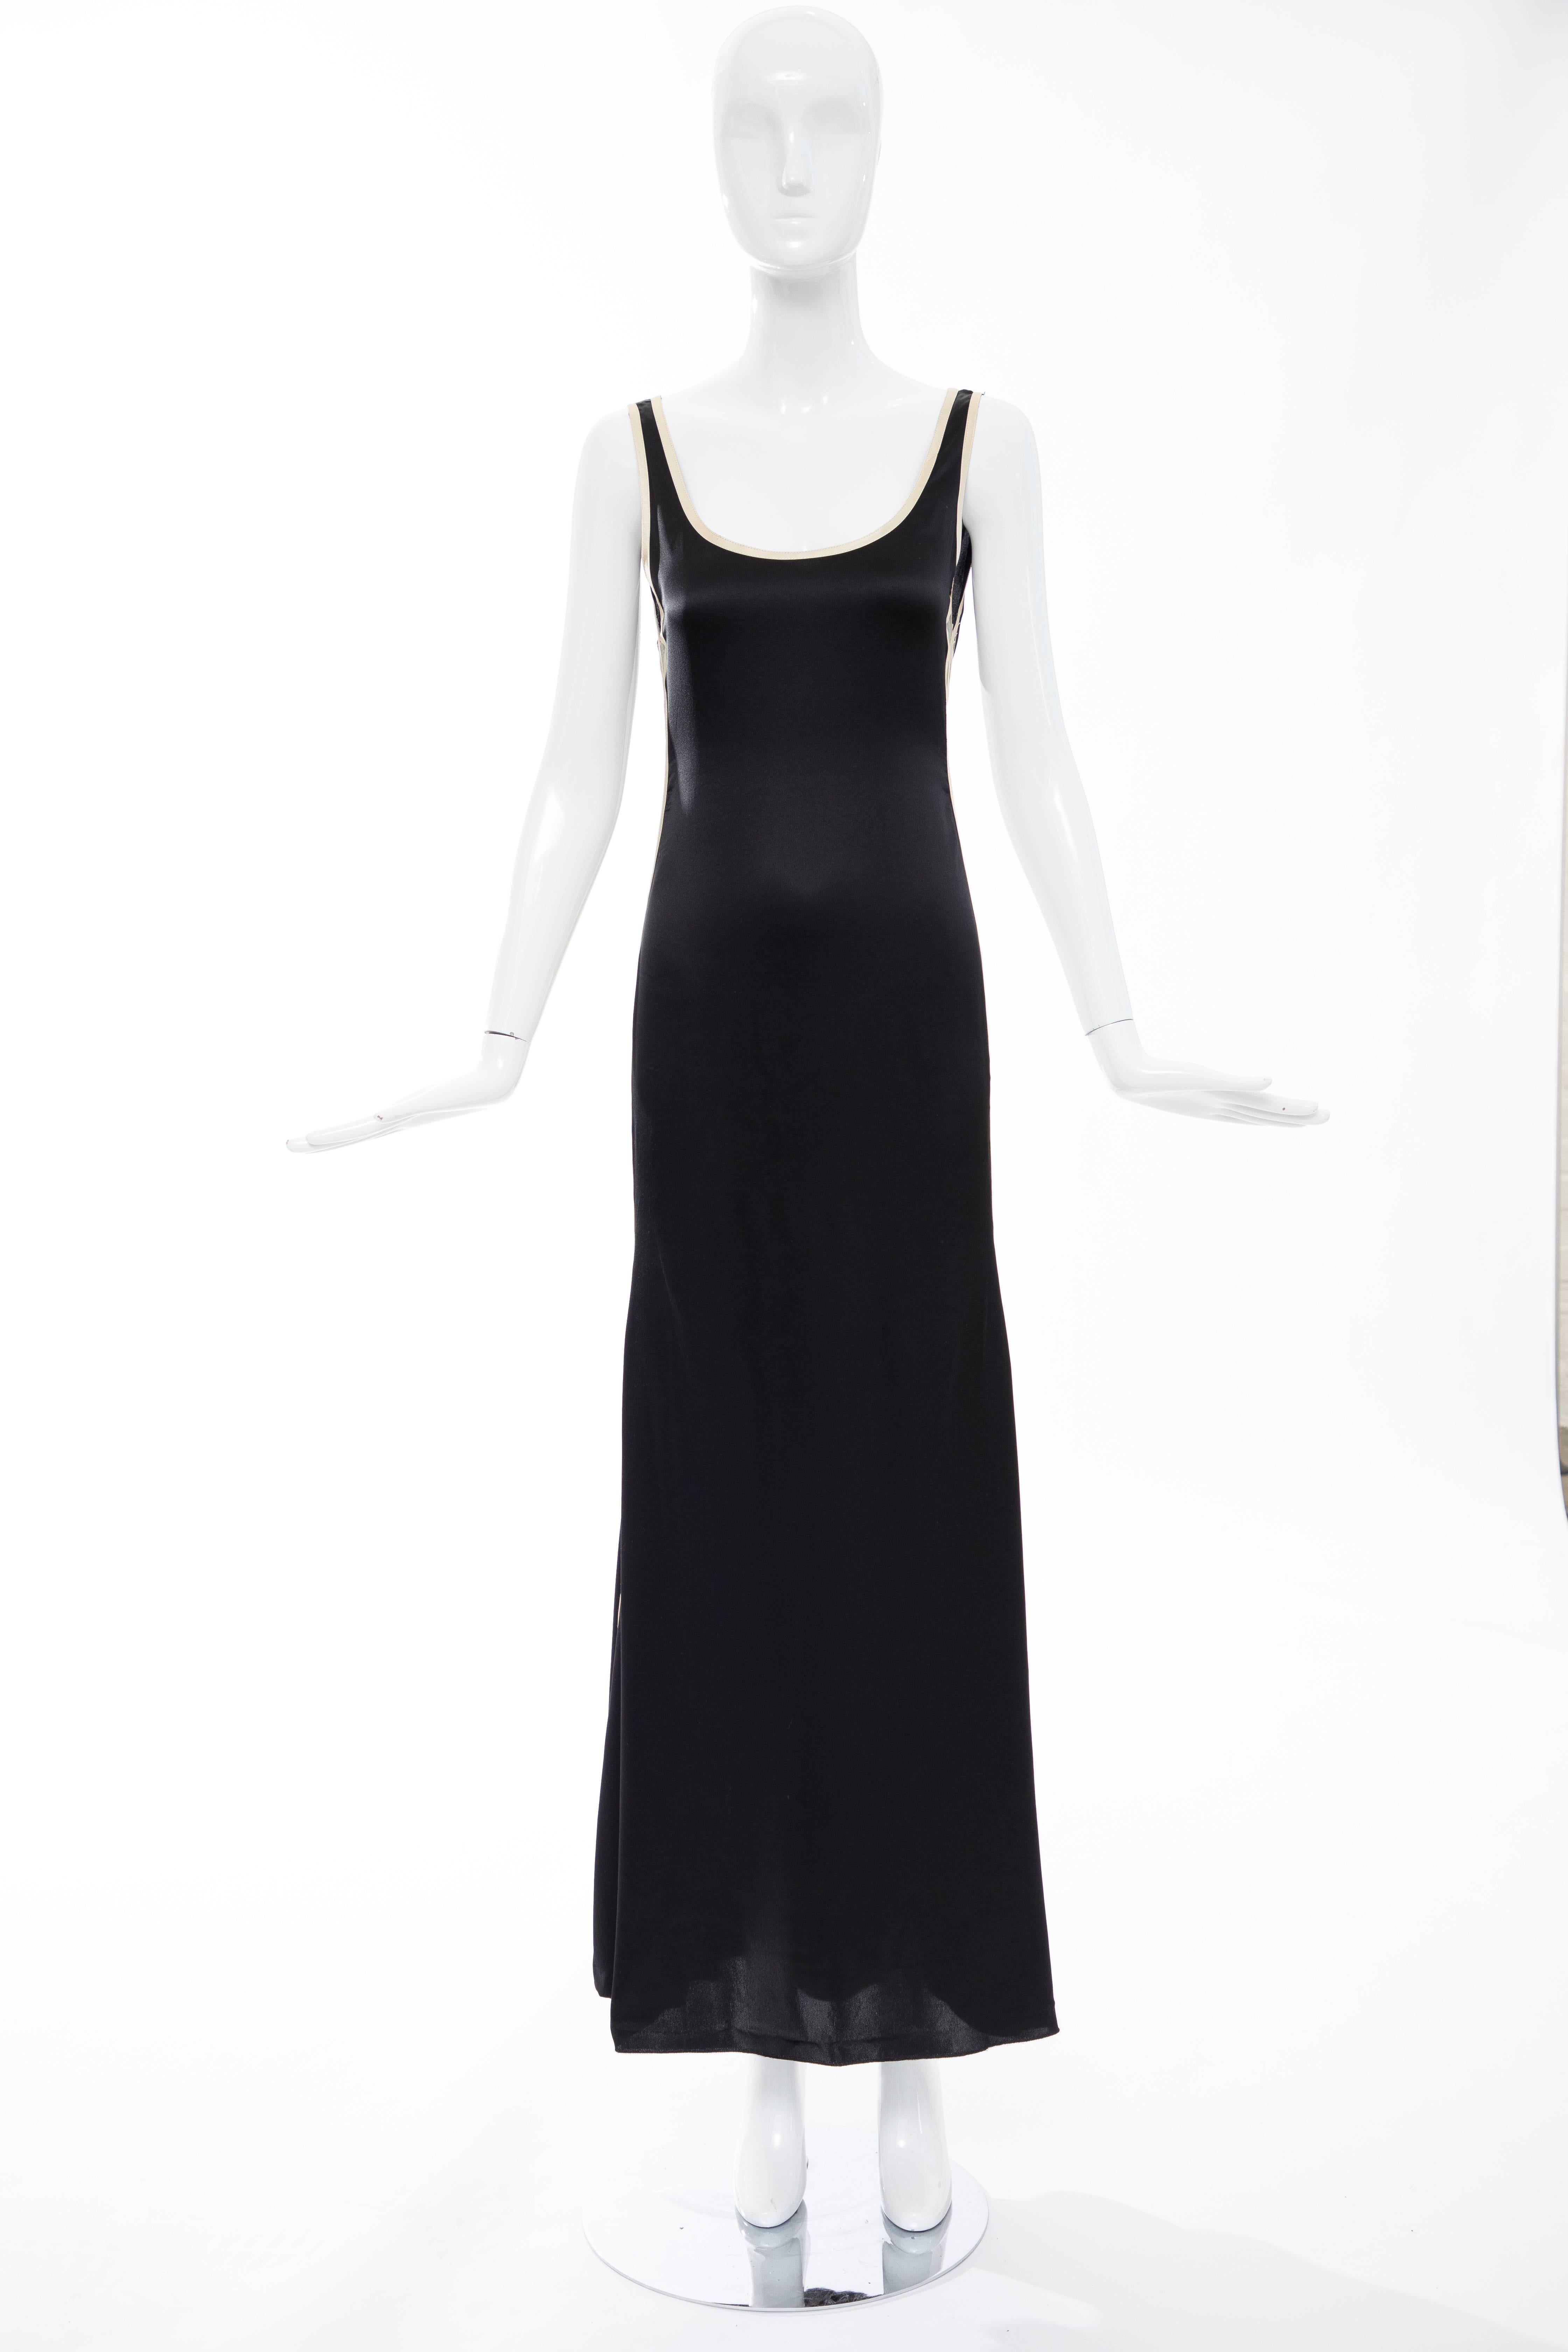 Jean Paul Gaultier, Spring-Summer 2007 silk embroidered evening dress with scoop neckline, contrast piping throughout, mesh trim at sides and low cut back.

US. 6

Bust: 33, Waist 28, Hips 34, Length 58
